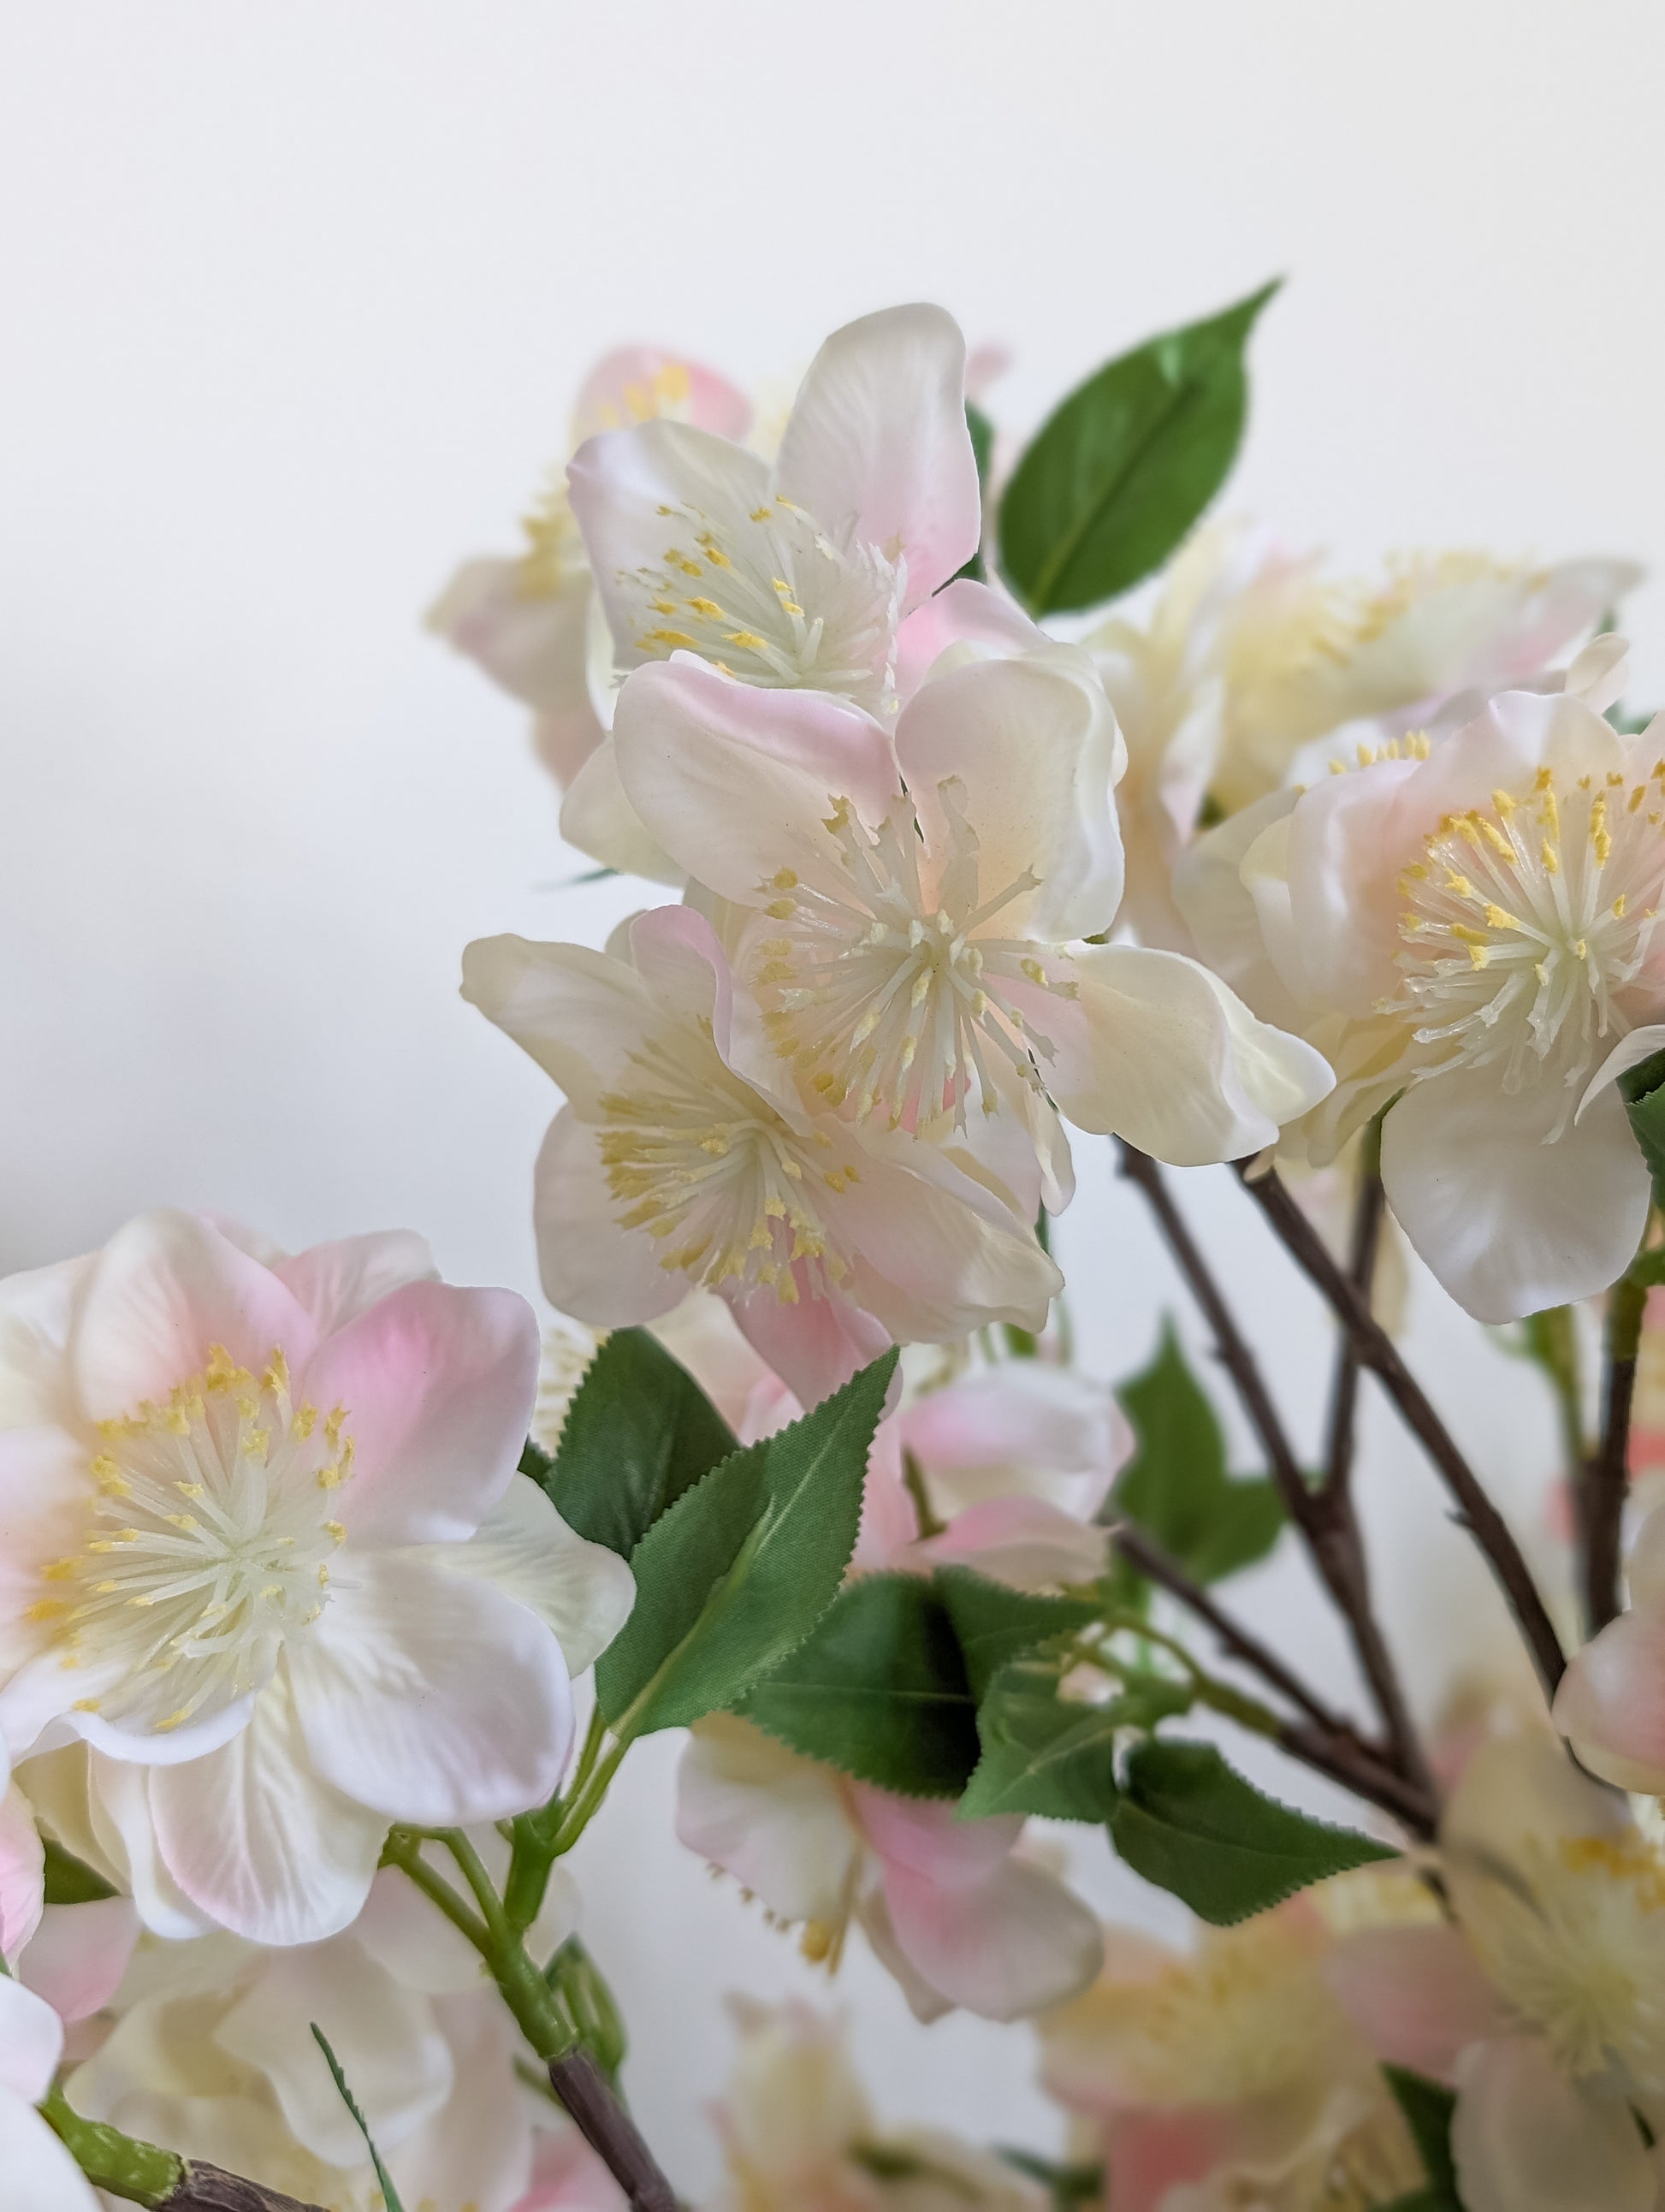 Close up of realistic faux cherry blossom stem with real touch petals with gradient of pink and white petals